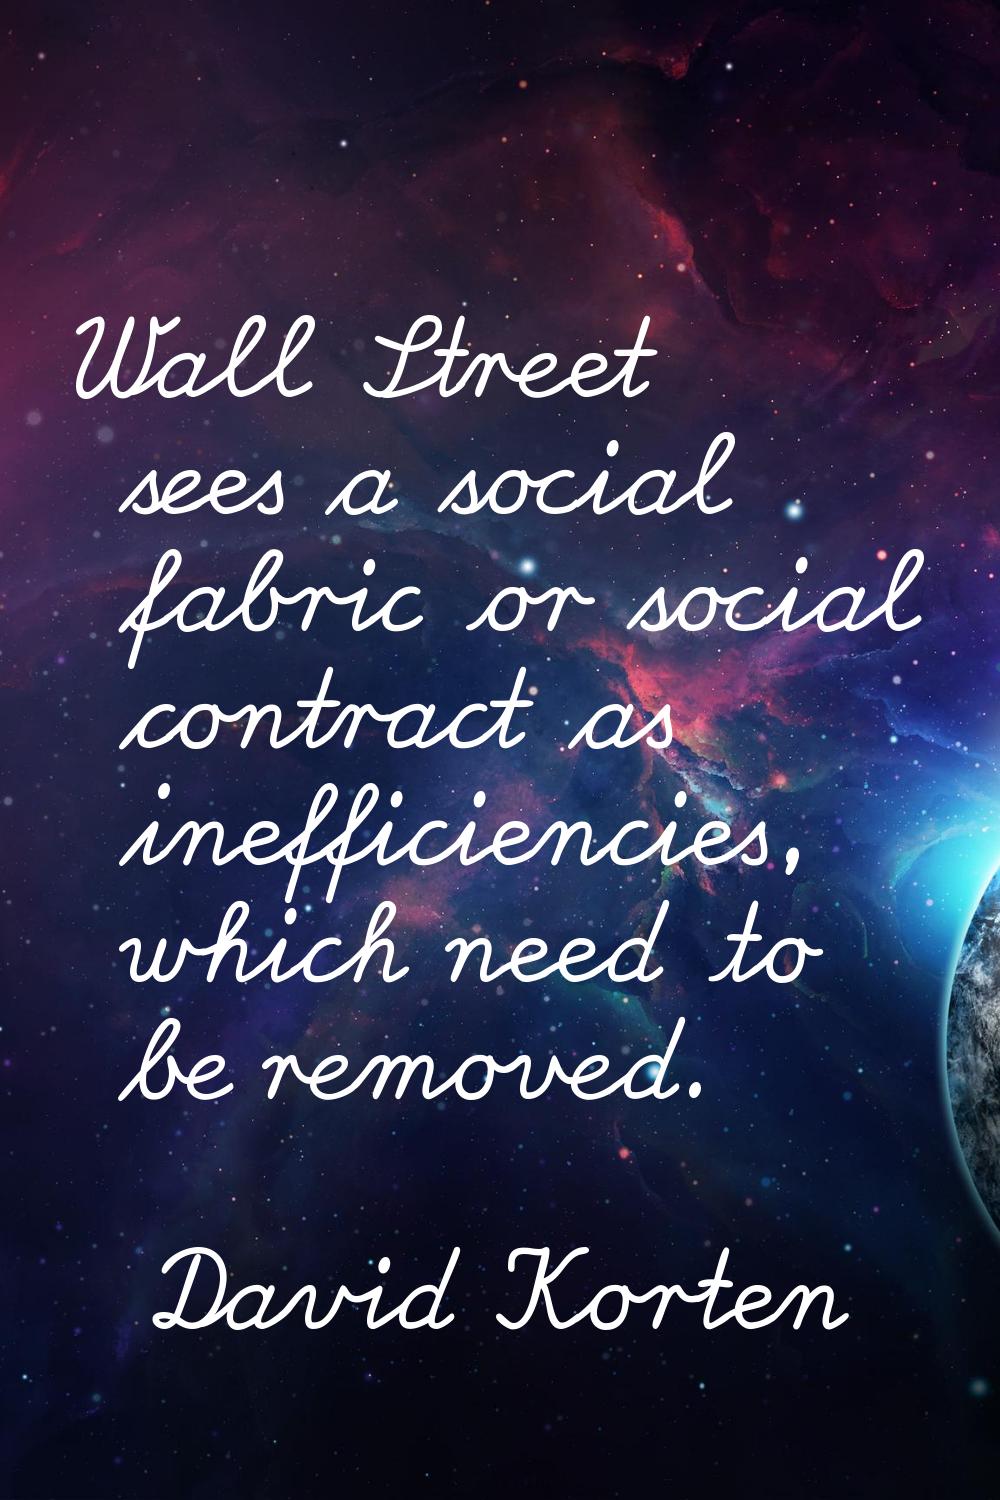 Wall Street sees a social fabric or social contract as inefficiencies, which need to be removed.